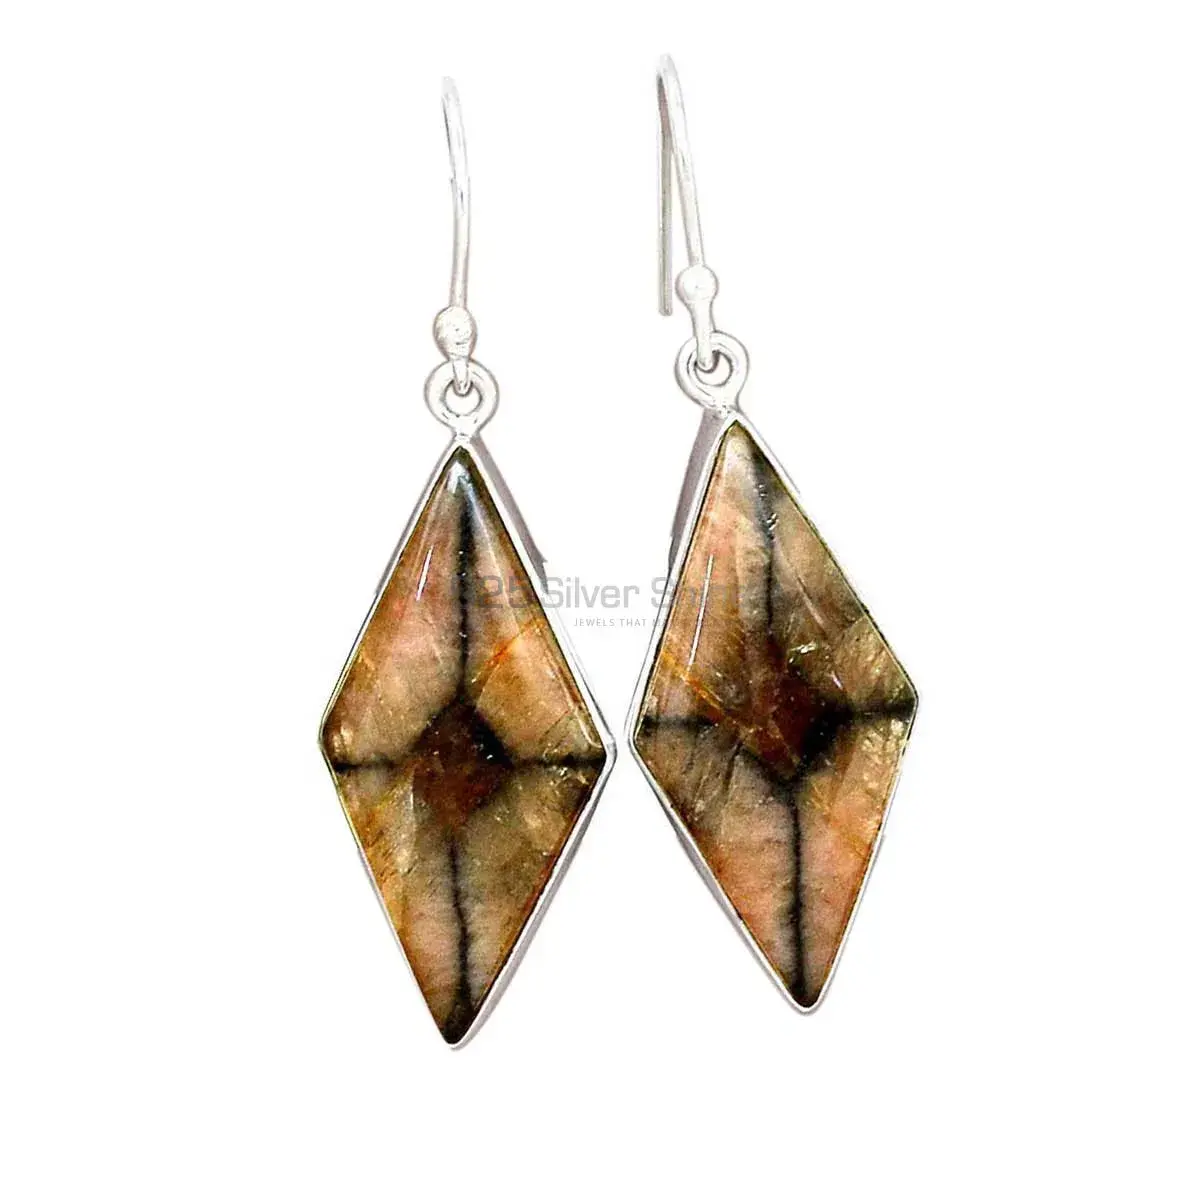 Affordable 925 Sterling Silver Handmade Earrings Manufacturer In Chiastolite Gemstone Jewelry 925SE2748_4